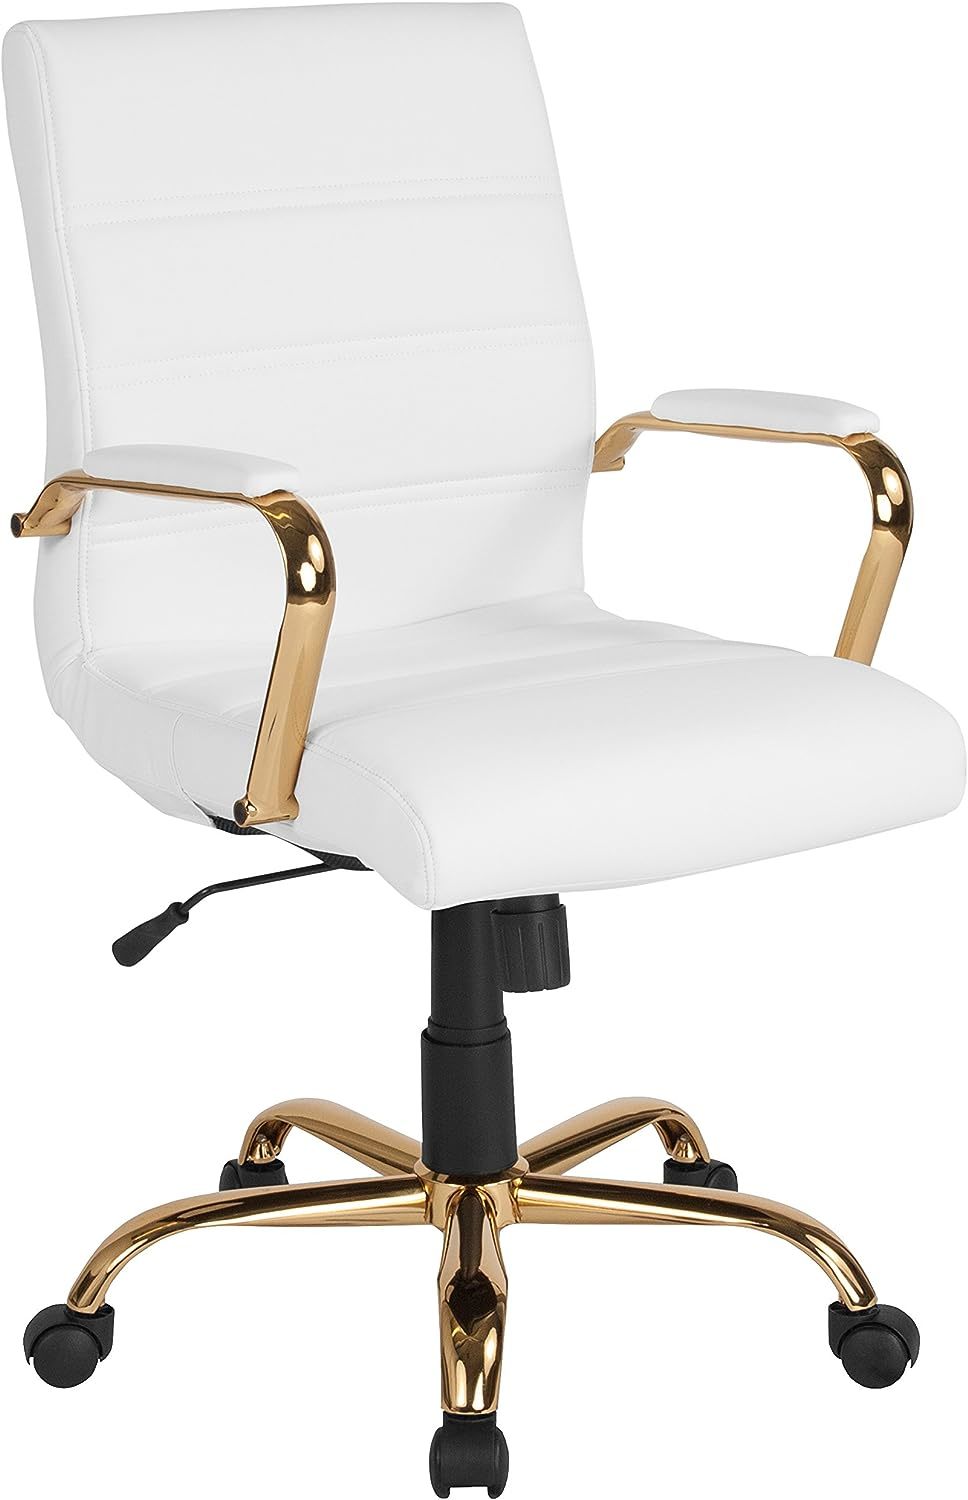 White Leathersoft Executive Swivel Office Chair With A Gold Frame From Flash - $197.97